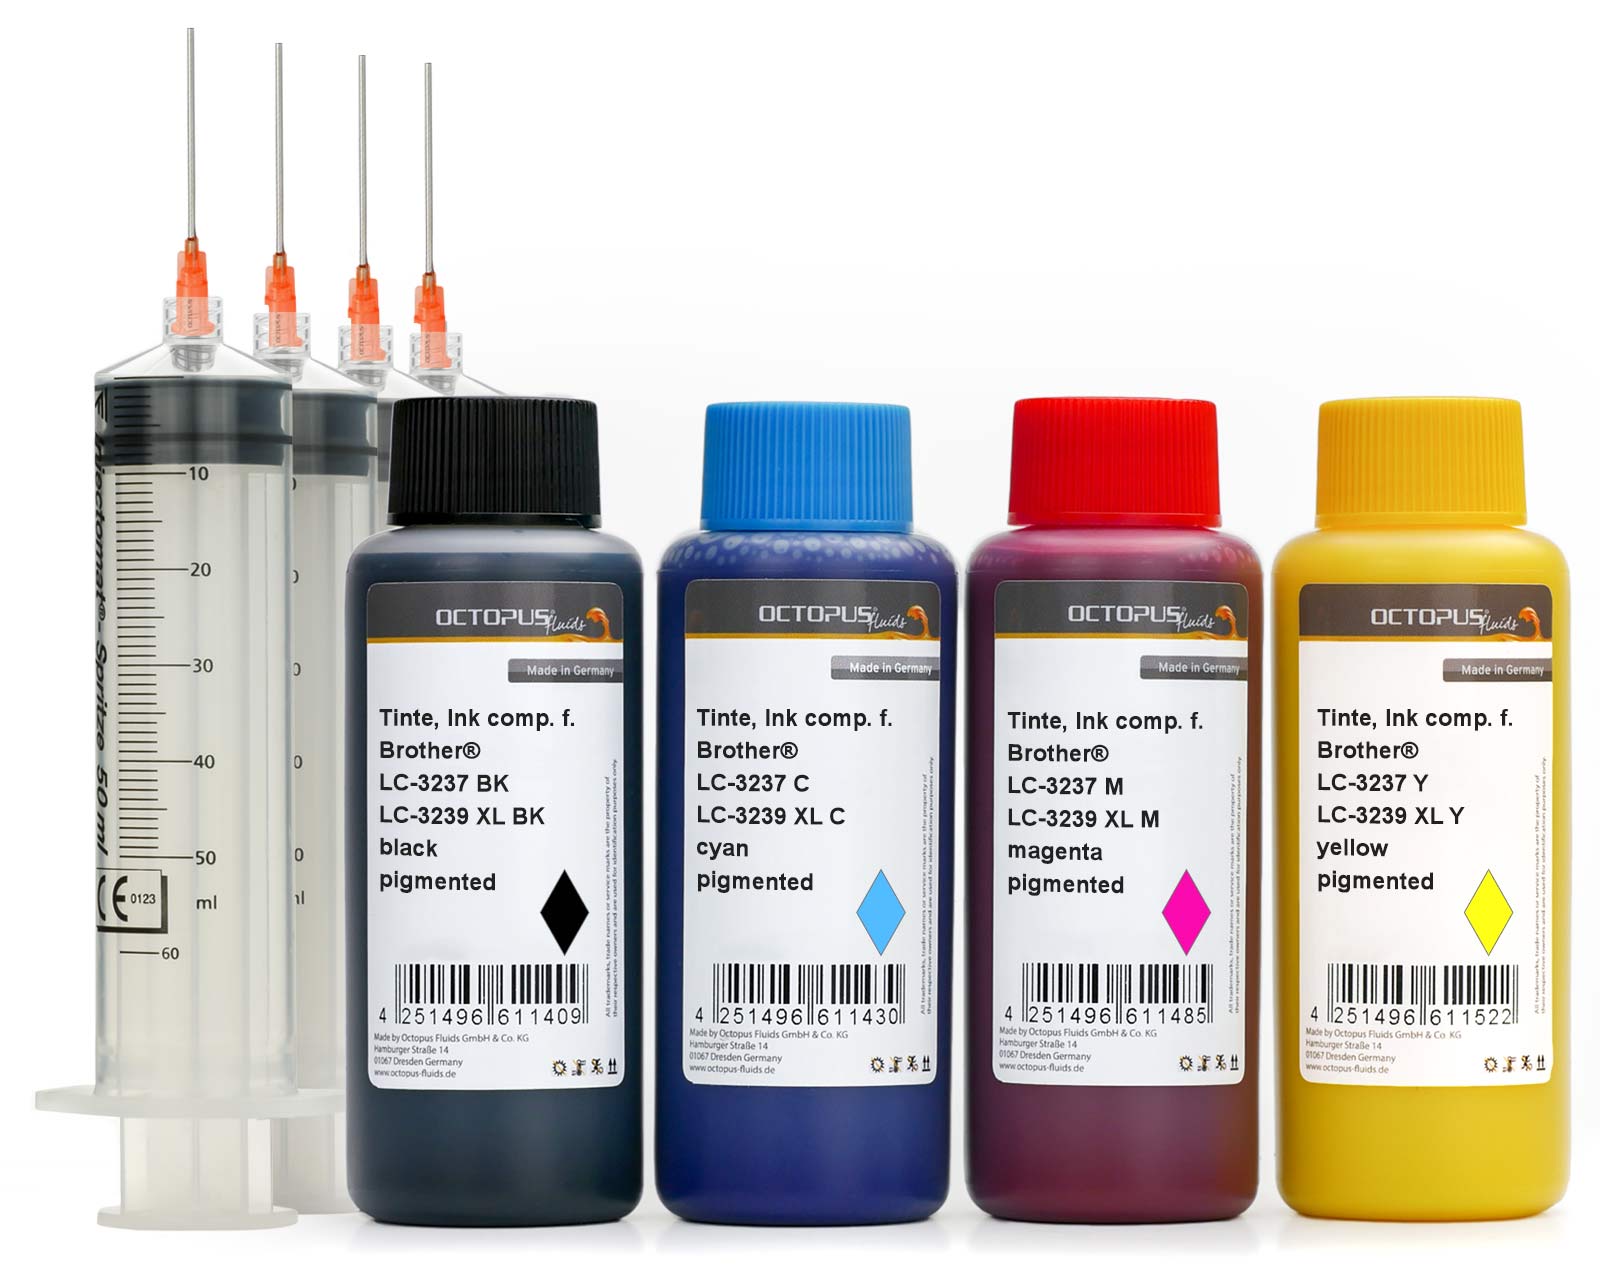 Refill Ink set for Brother LC-3237, LC-3239 XL, HL-J 6000 DW, HL-J 6100 DW, MFC-J 5945 DW, MFC-J 6945 DW, MFC-J 6947 DW